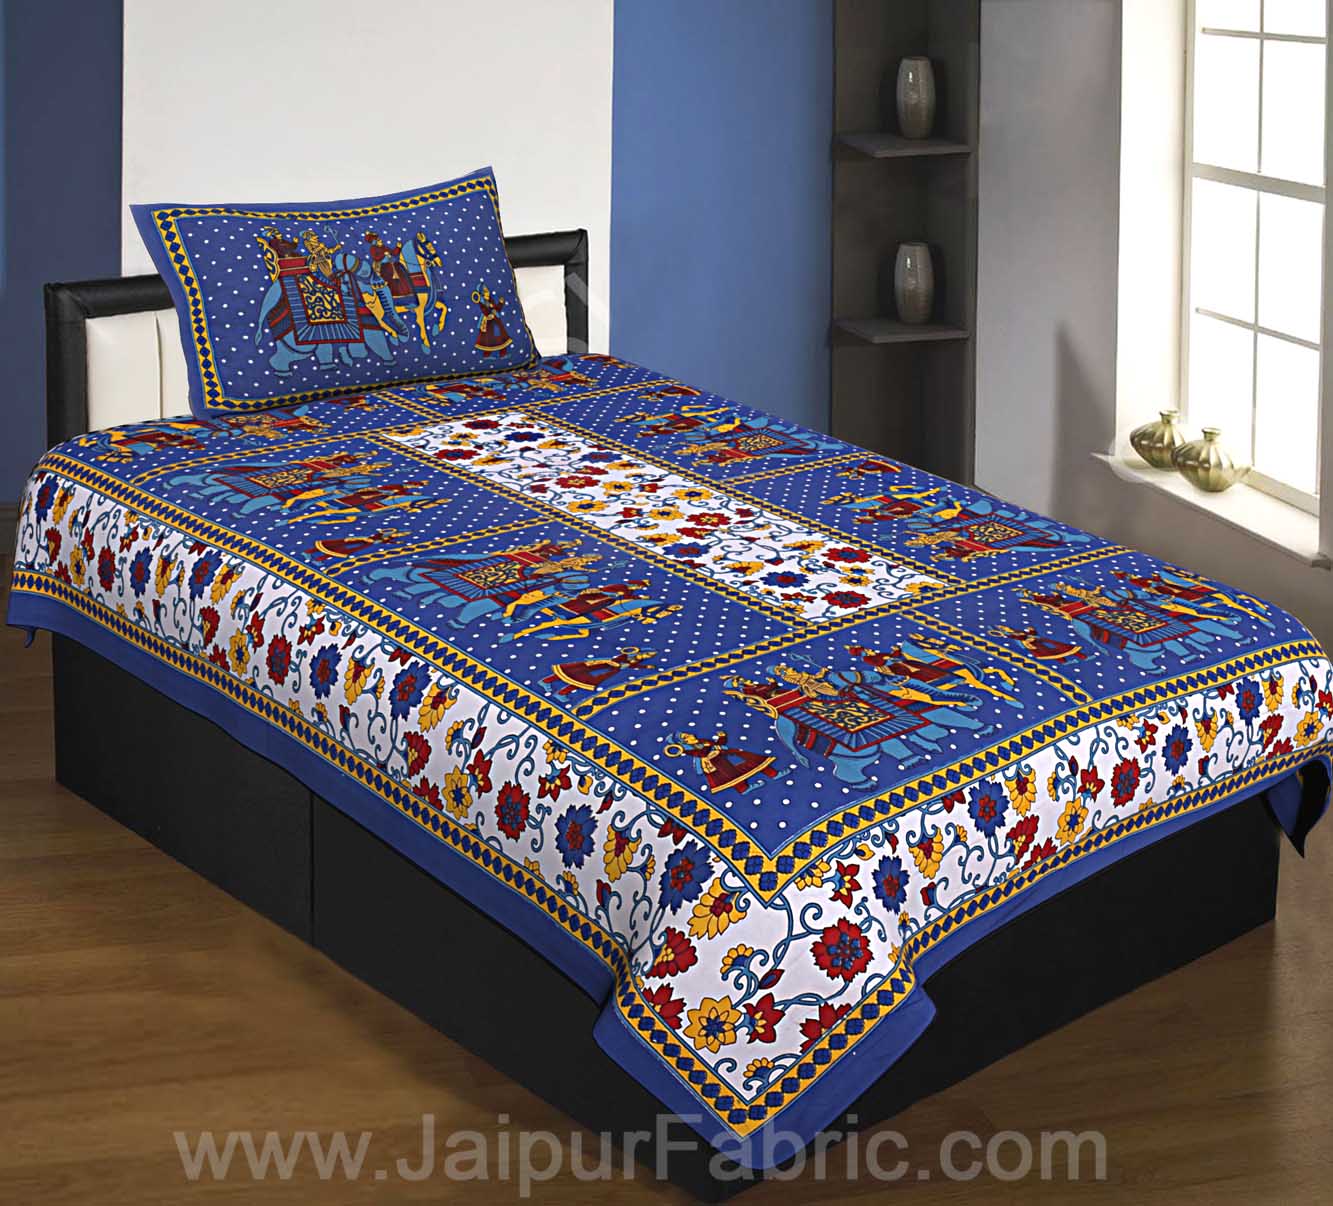 COMBO1 Beautiful Multicolor 4 Bedsheet + 4 Pillow Cover